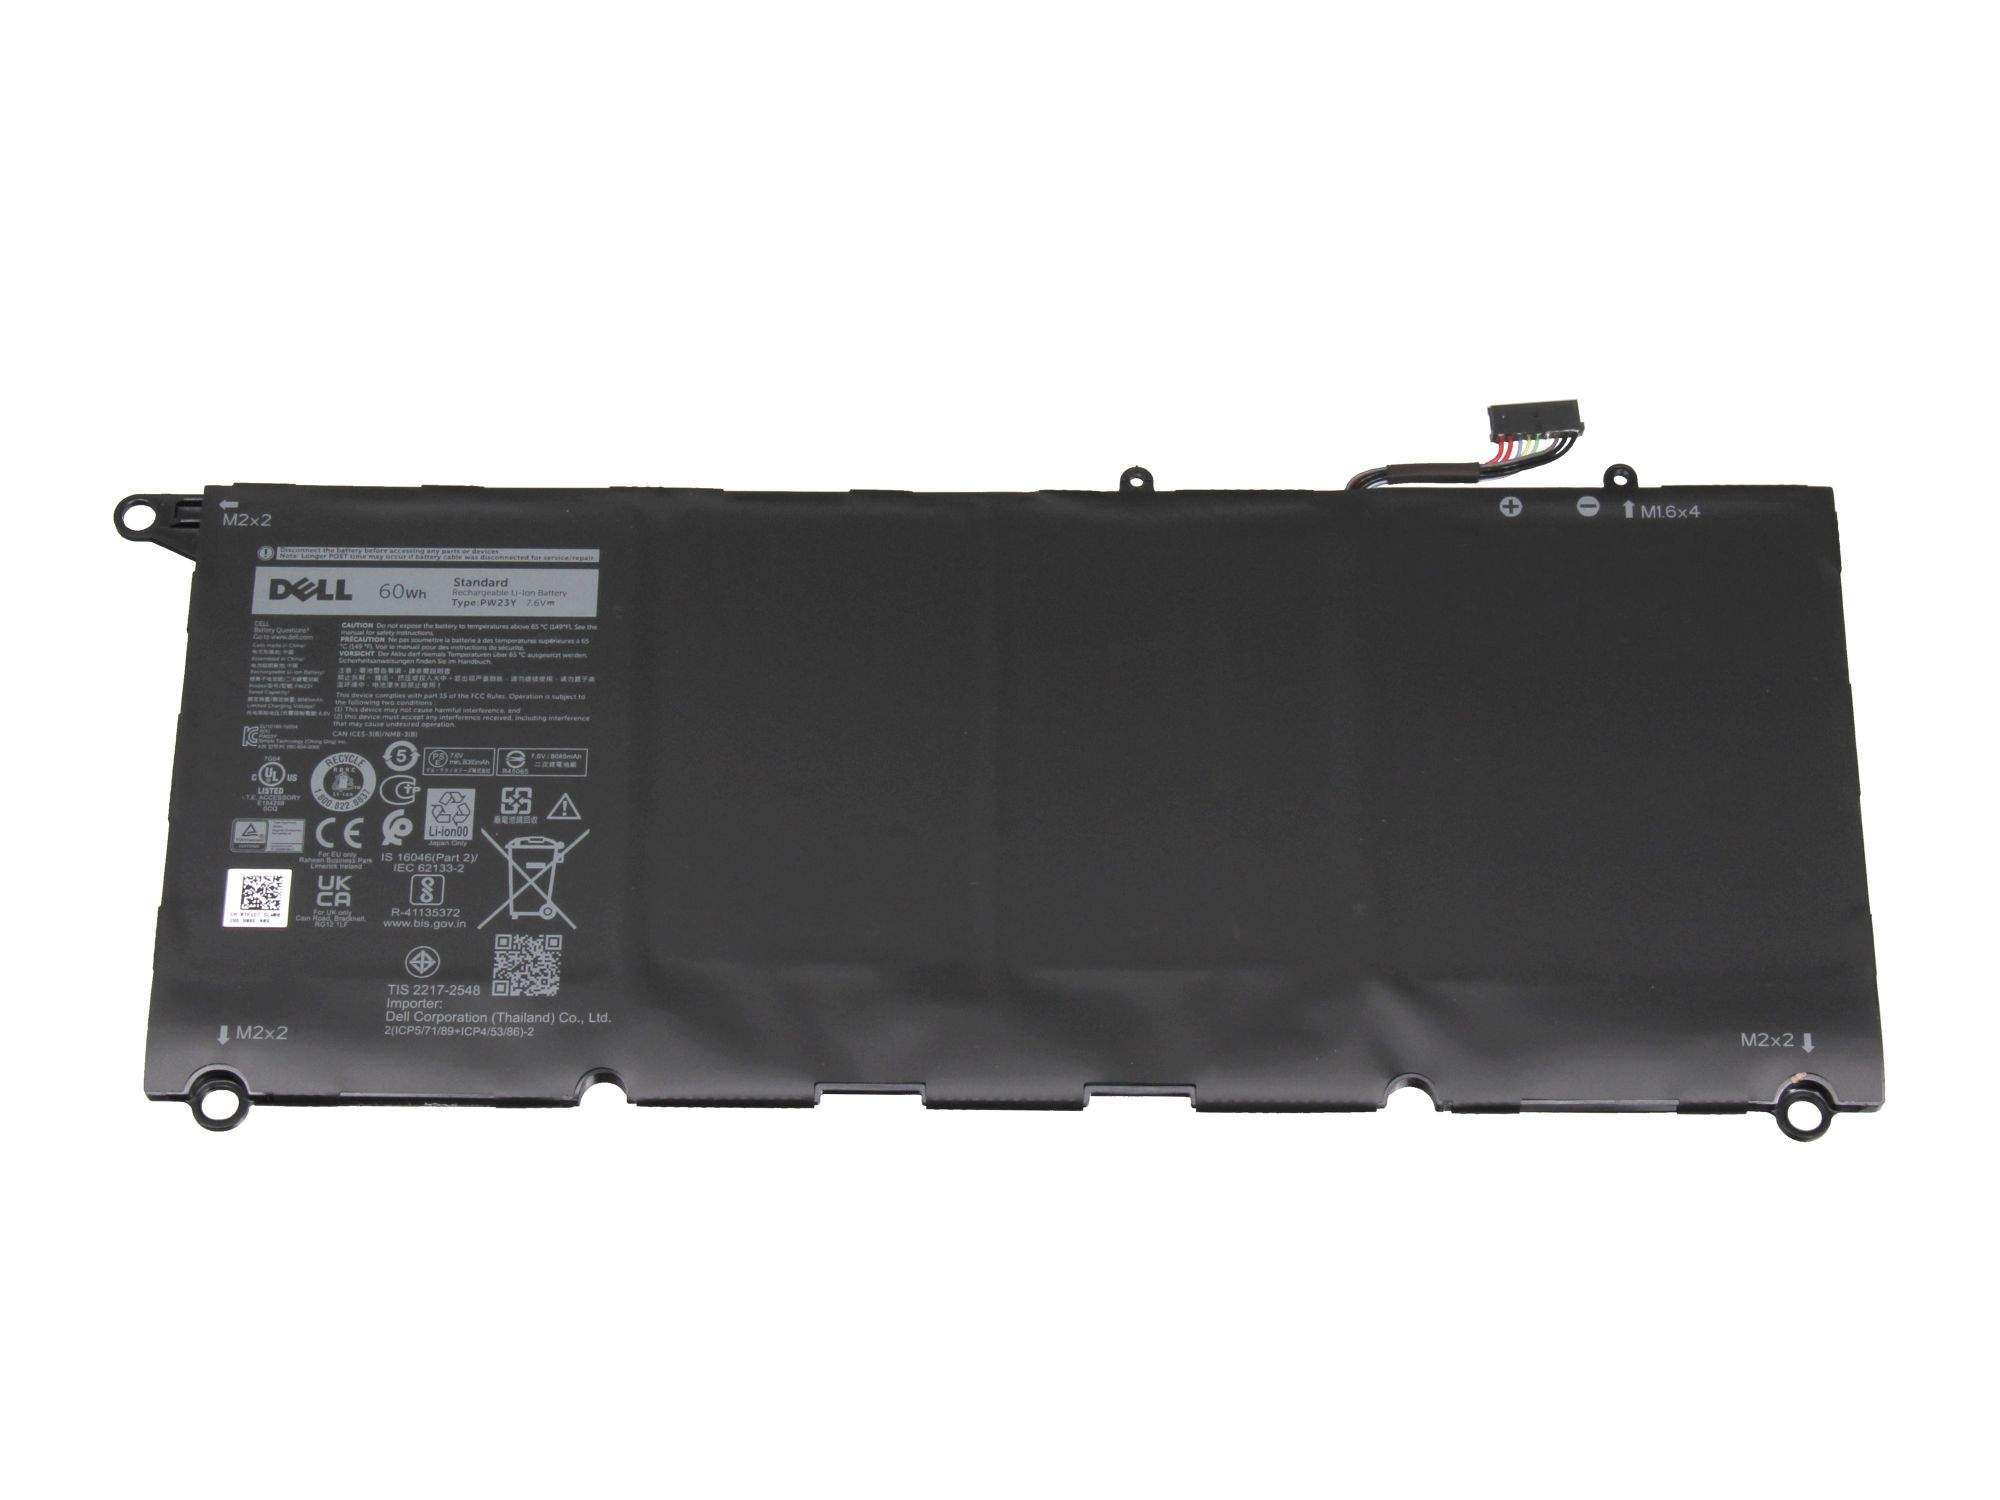 DELL Battery 60WHR 4 Cell Lithium